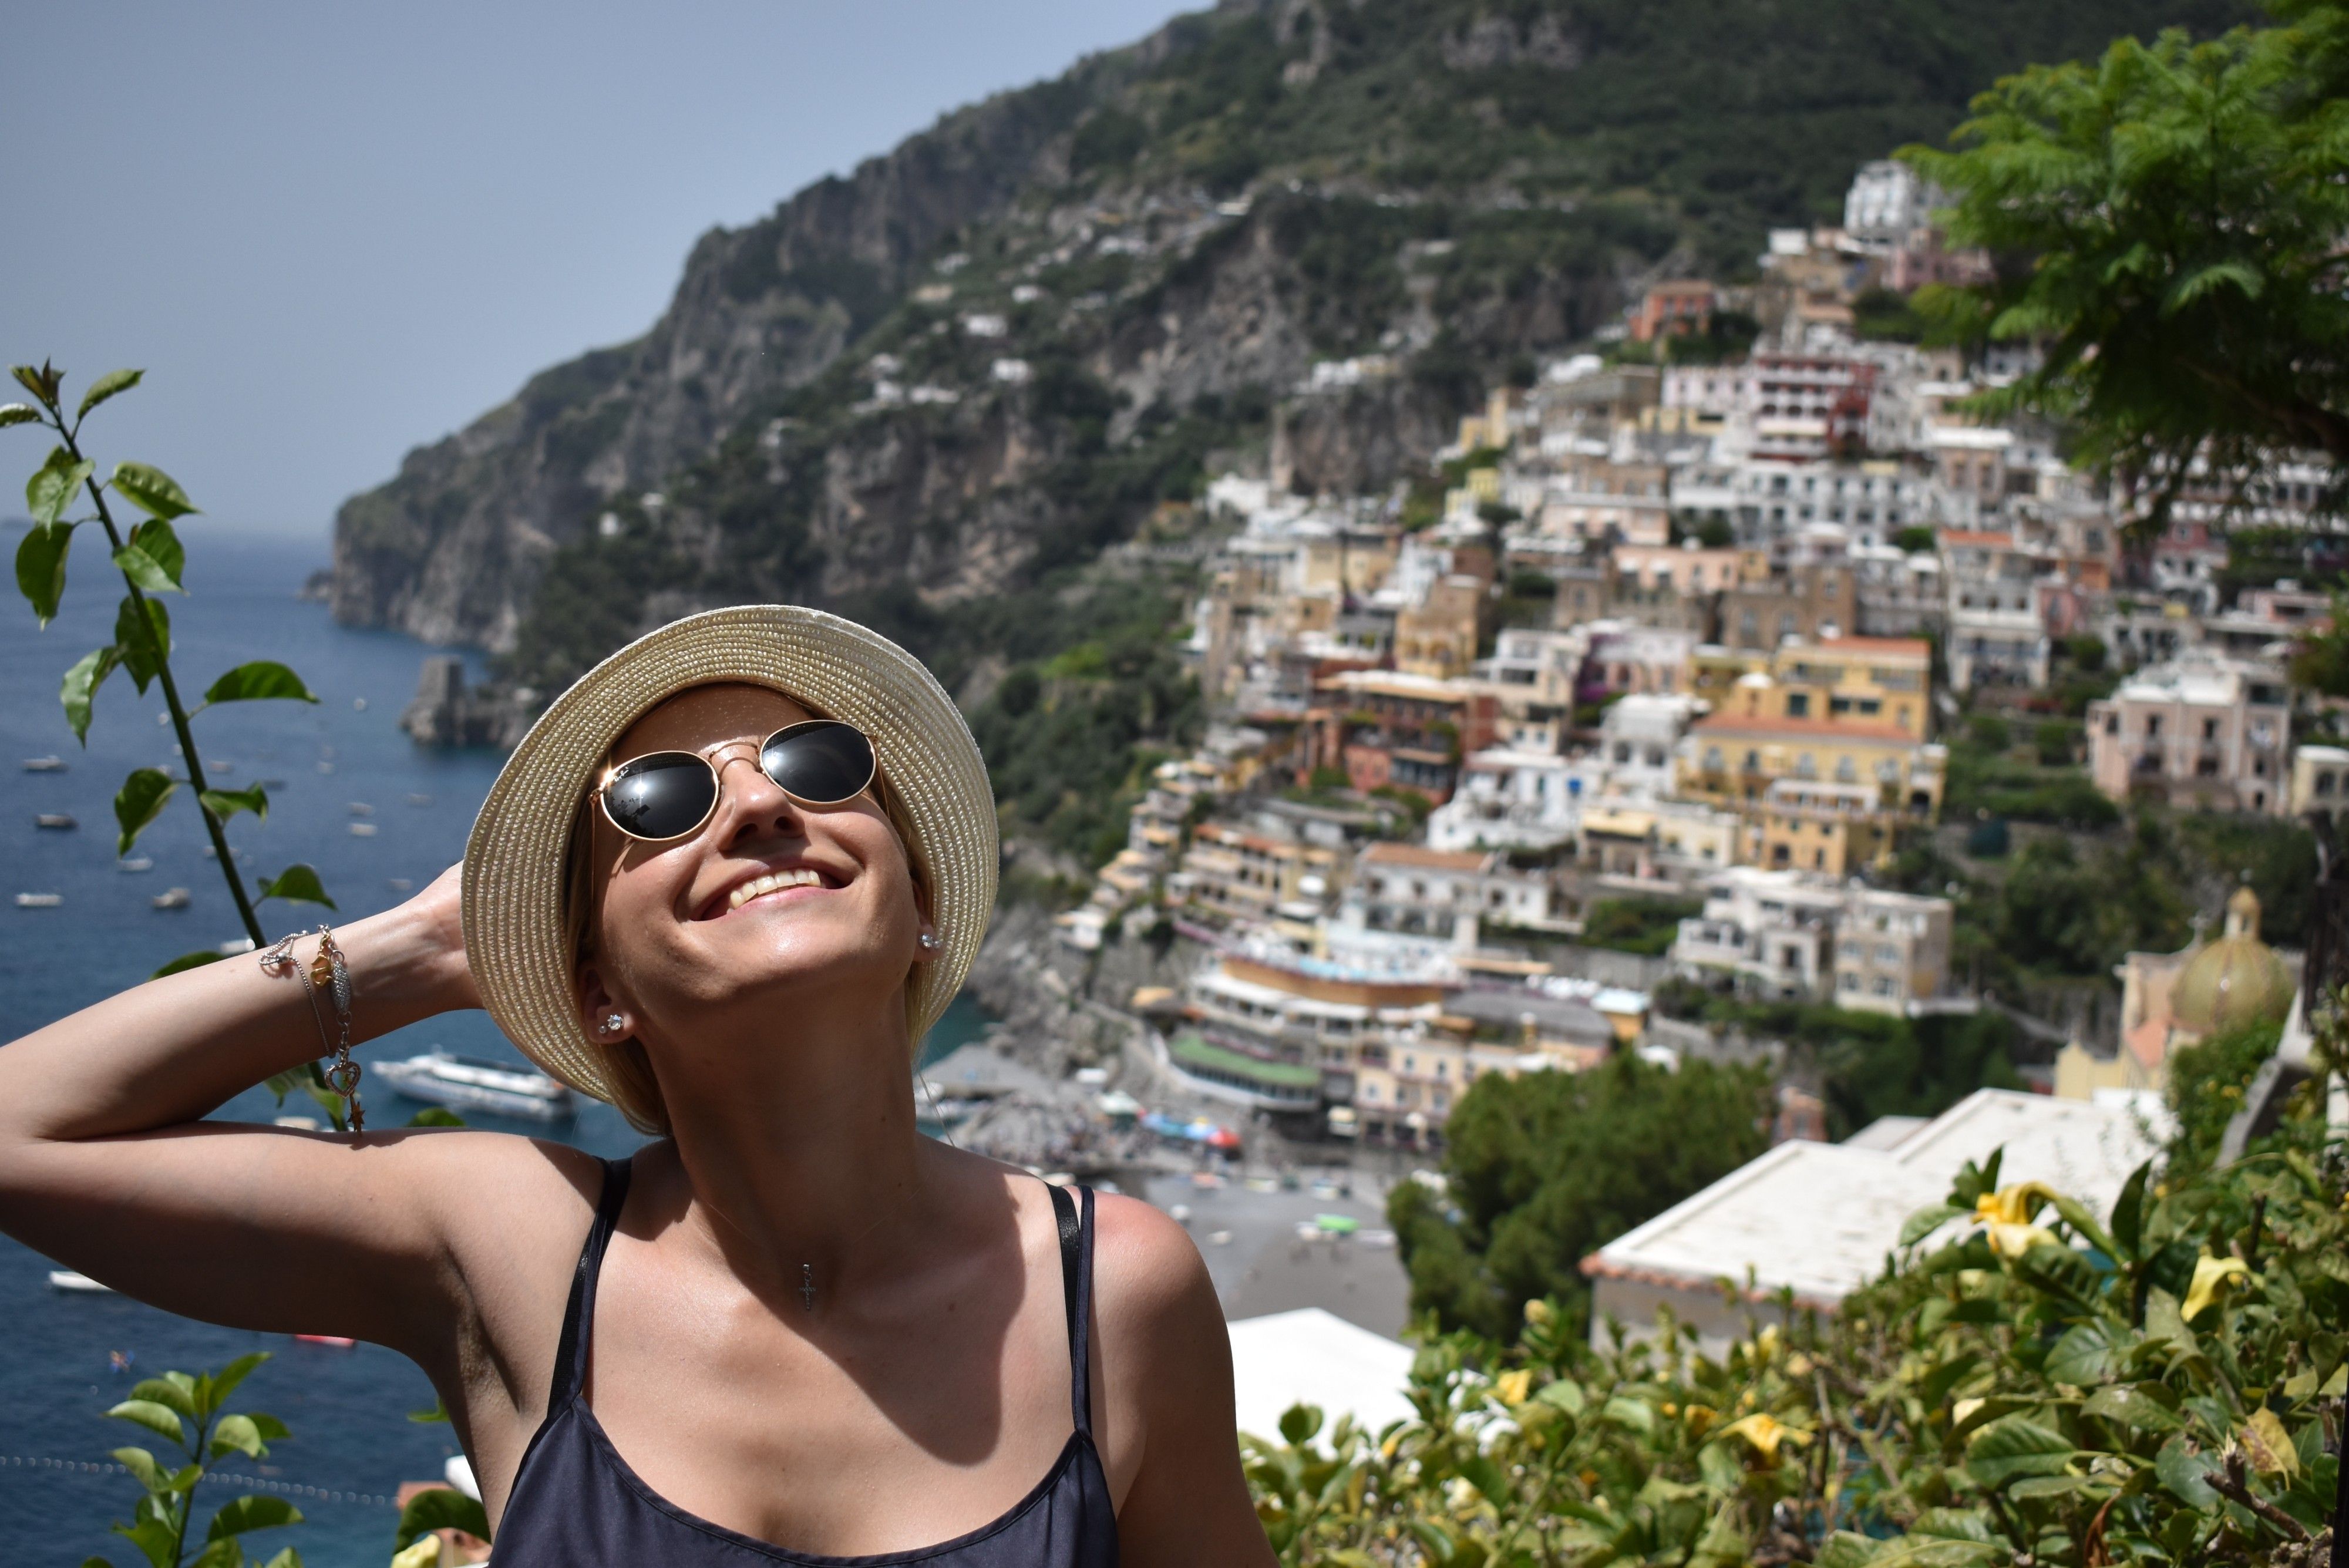 Caption: A photo of Google Moderator @MoniDi with sunglasses and a straw hat, looking up at the sun and smiling, standing on a terrace overlooking Positano, Italy. (Local Guide @MoniDi)